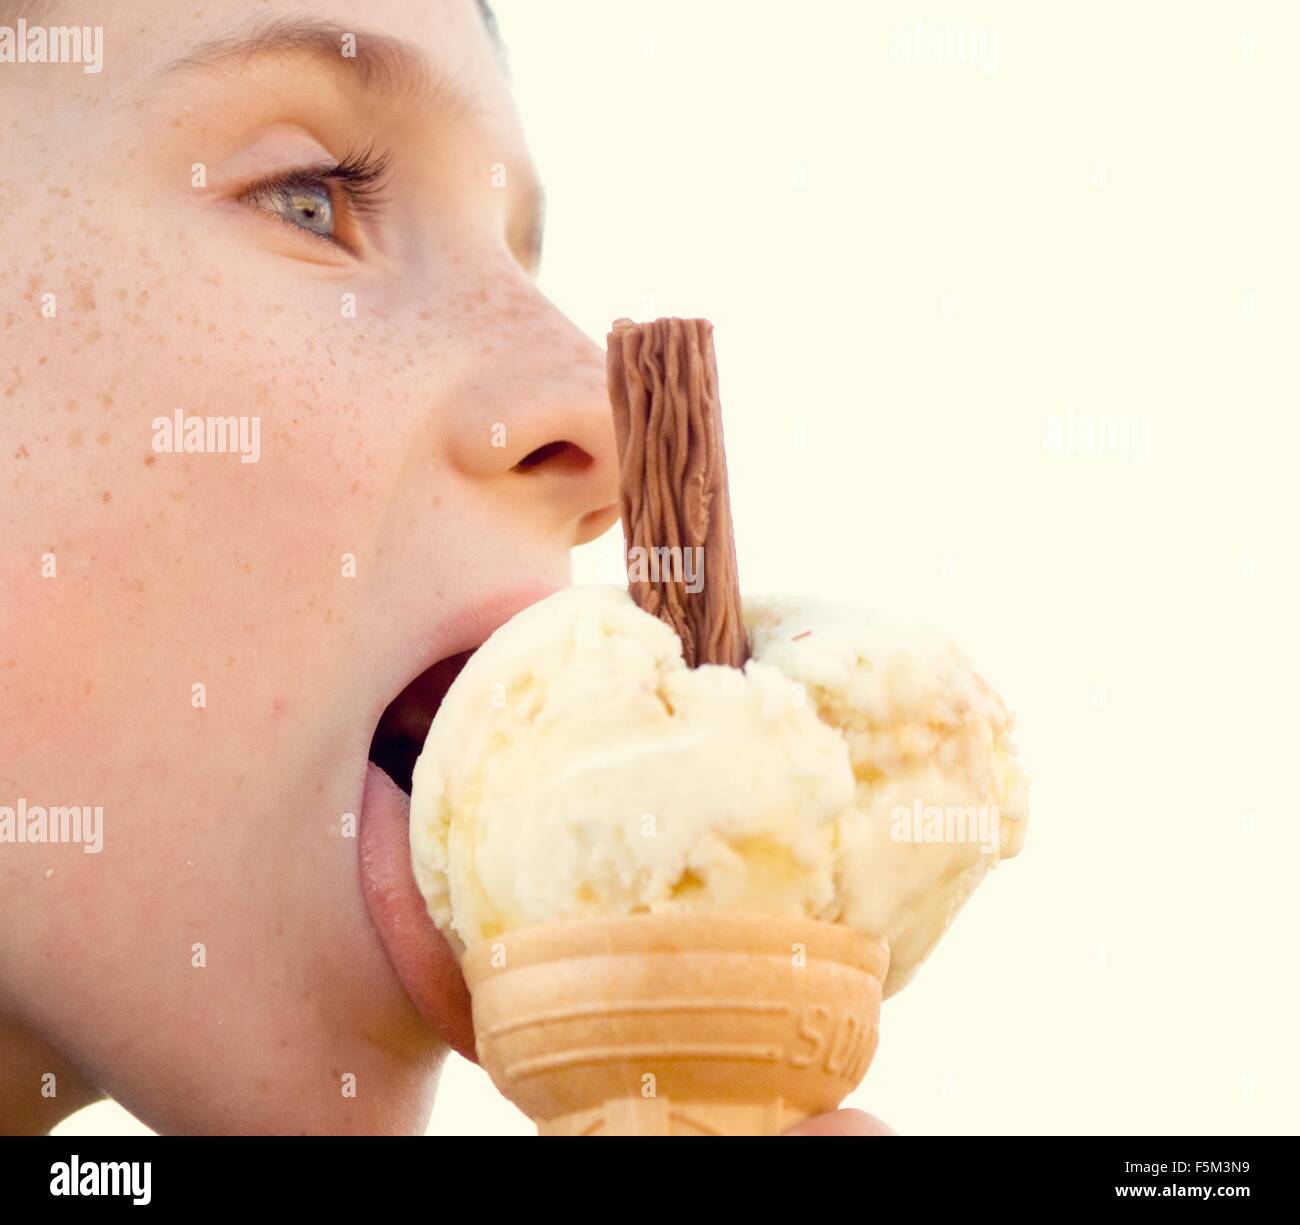 Side view close up of boy licking ice cream cone Stock Photo